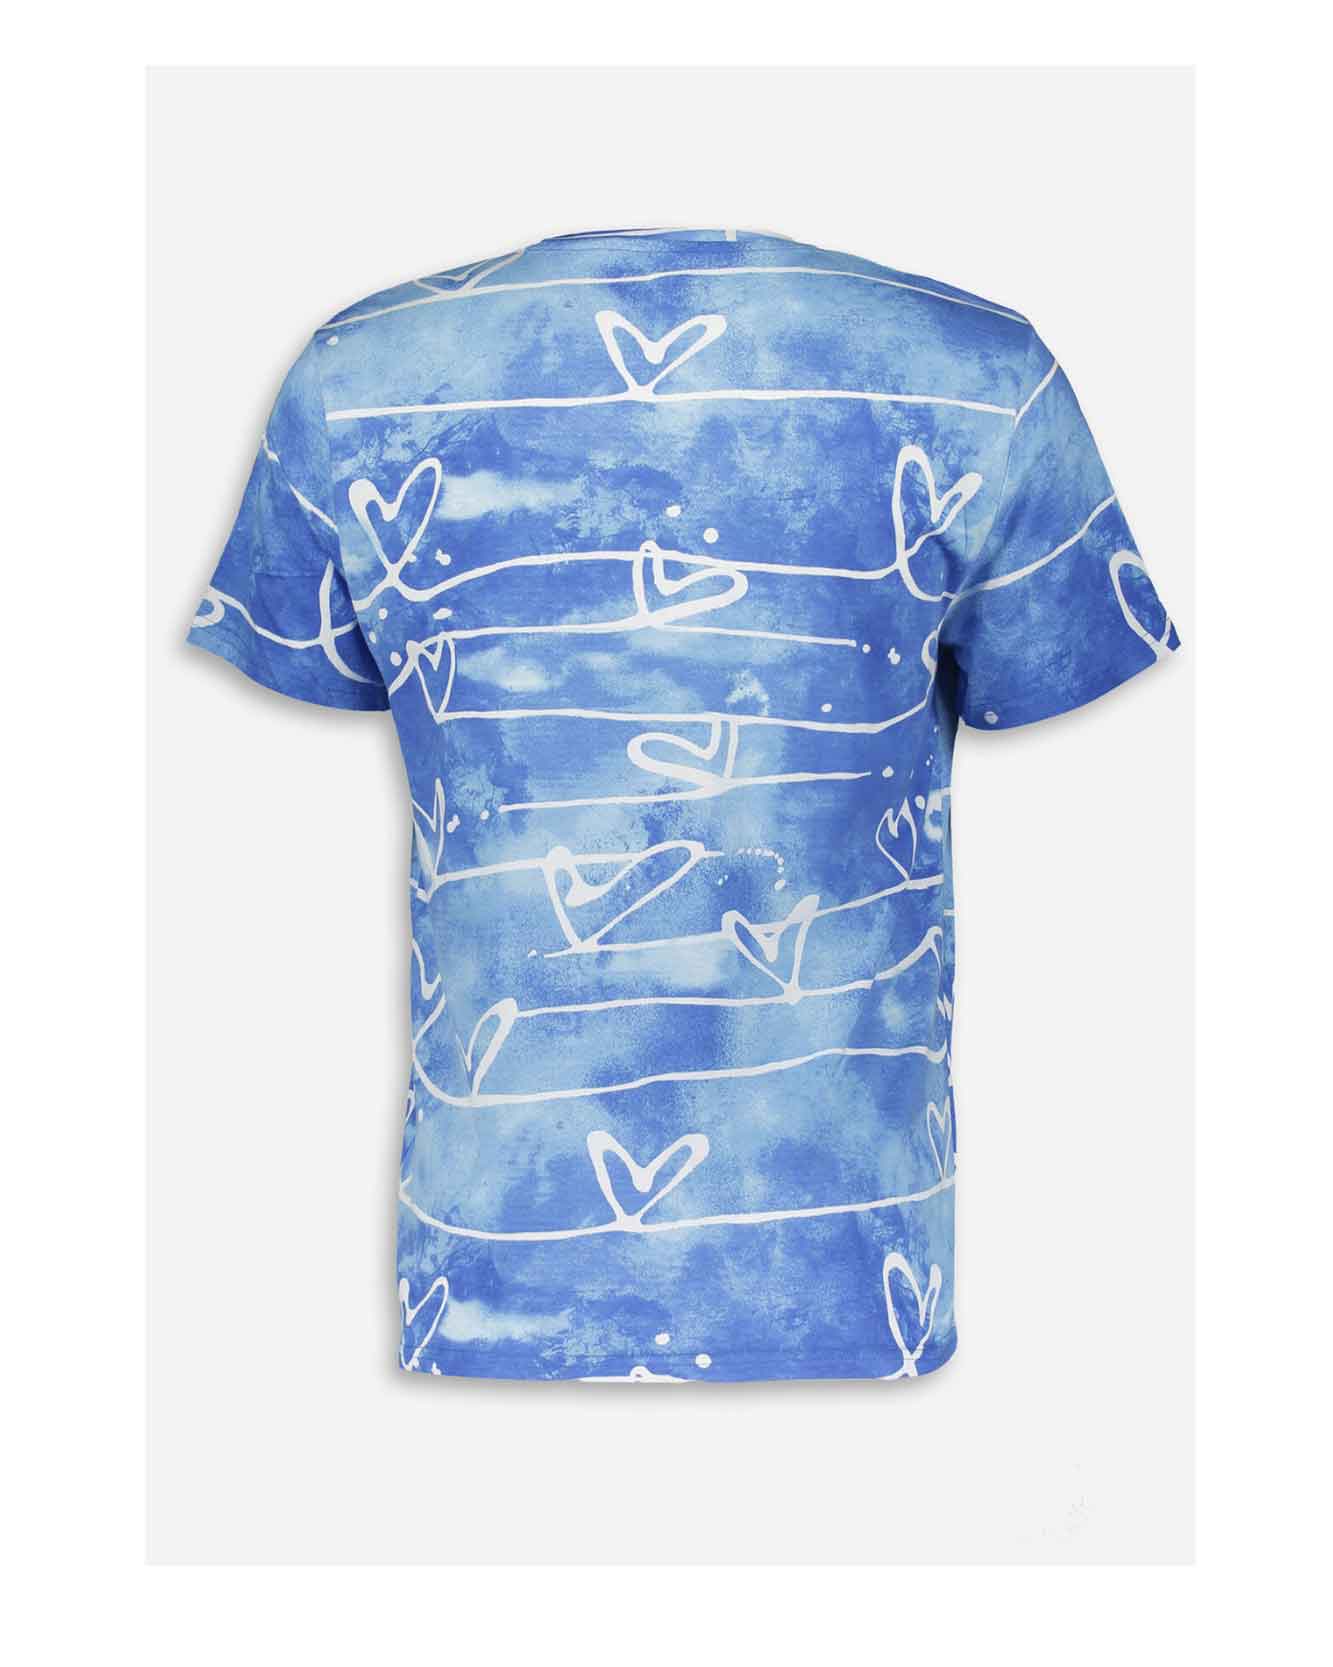 Illustrated t-shirt as part of a range of merchandise for CHOOSE LOVE charity in collaboration with TK Maxx and Print Club London. Repeat pattern of linear love hearts with a watercolour gradient ink background. Blue ink background.